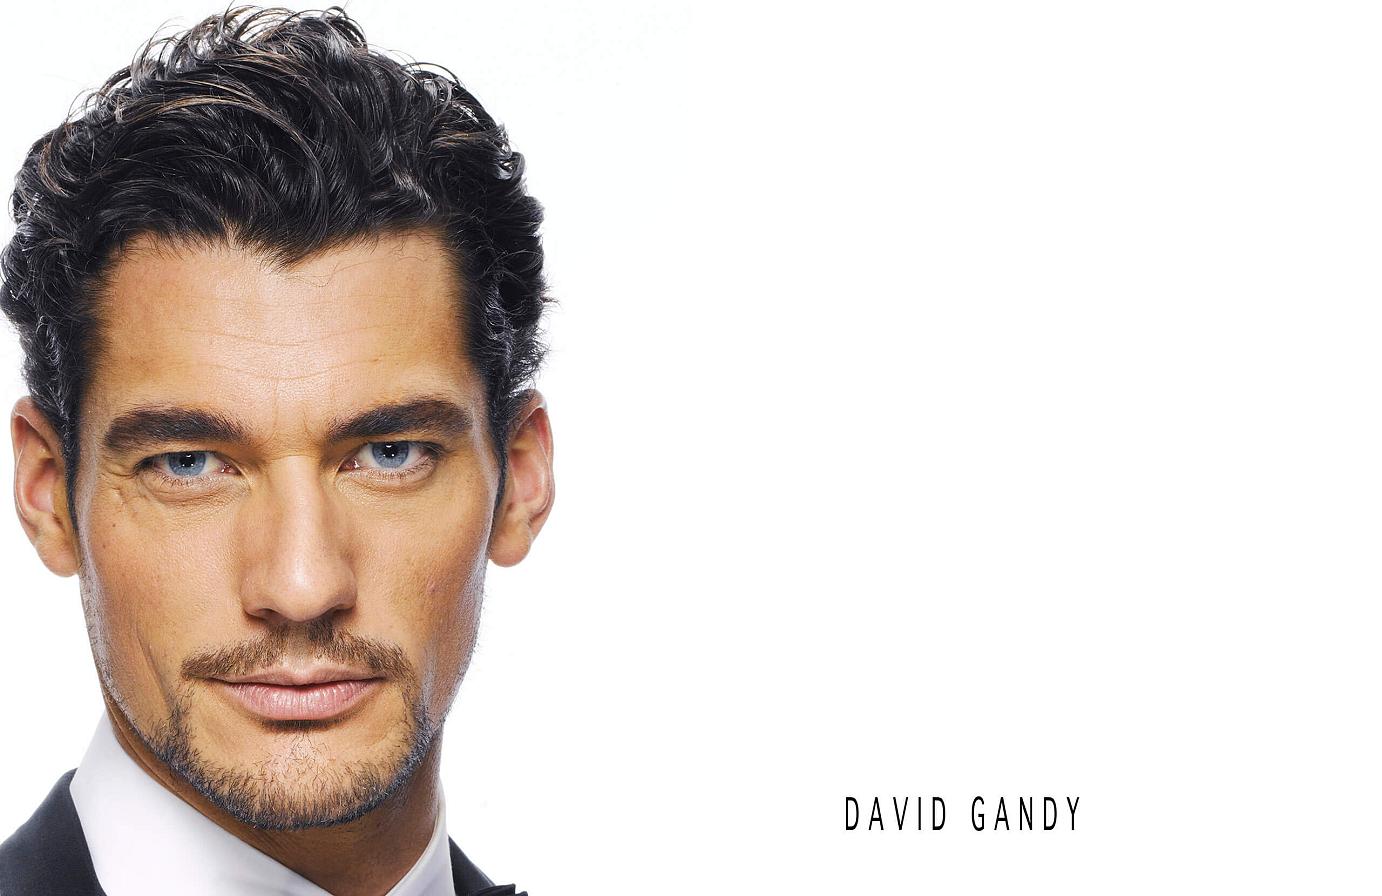 CoqCreative power by ProductionLink s.r.l. David Gandy David-Gandy  David Gandy